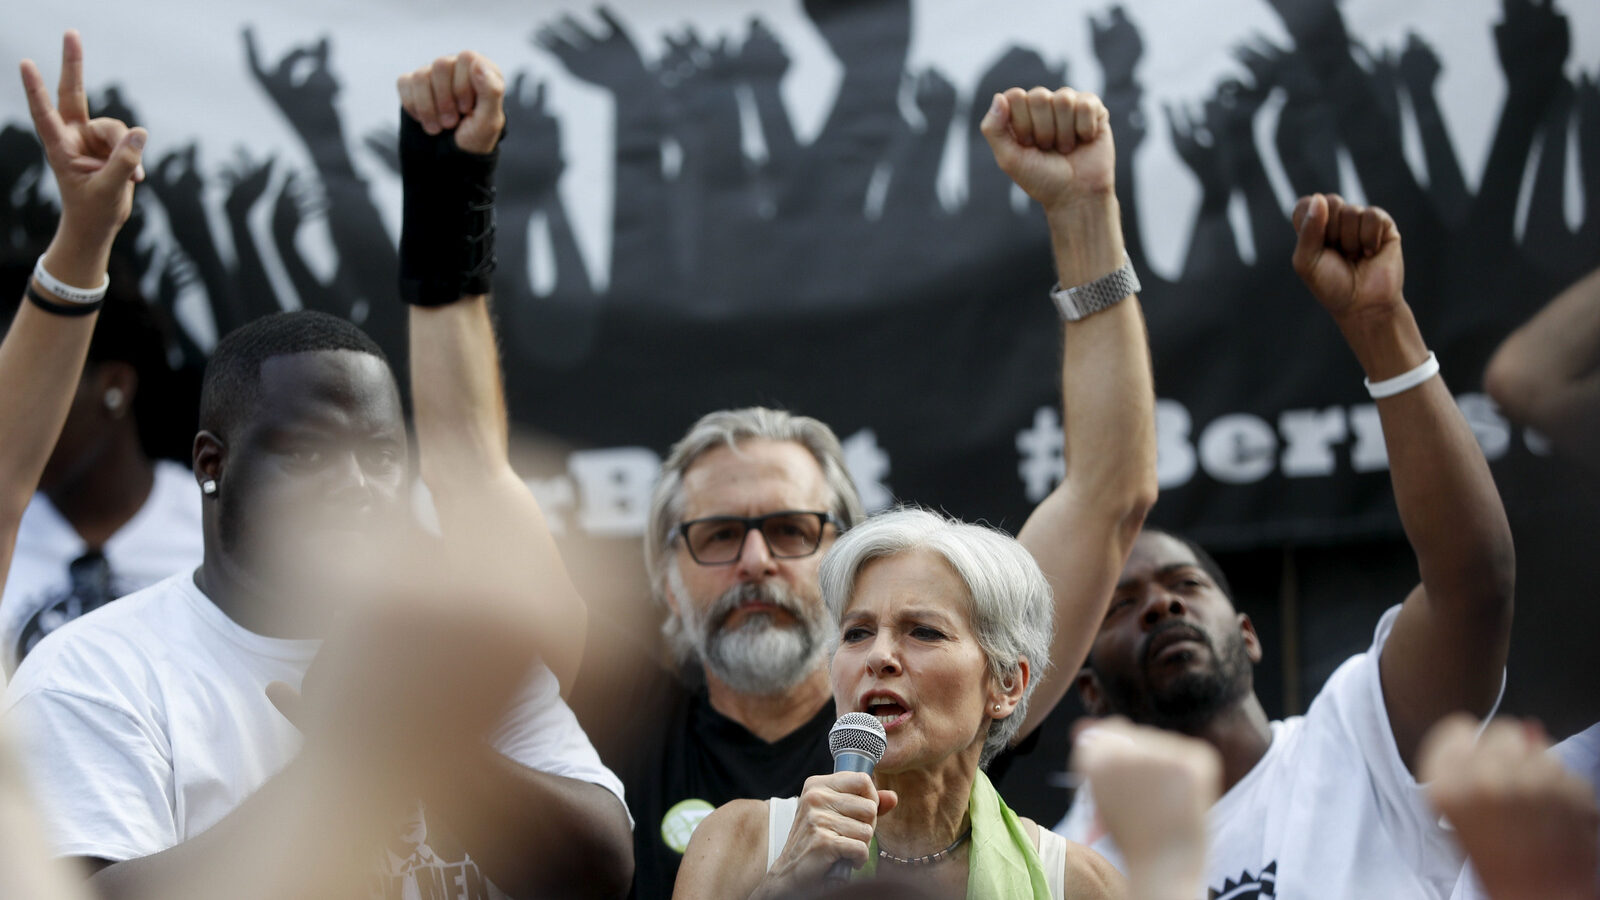 Dr. Jill Stein, Green Party presidential nominee, speaks at a rally in Philadelphia, Wednesday, July 27, 2016.